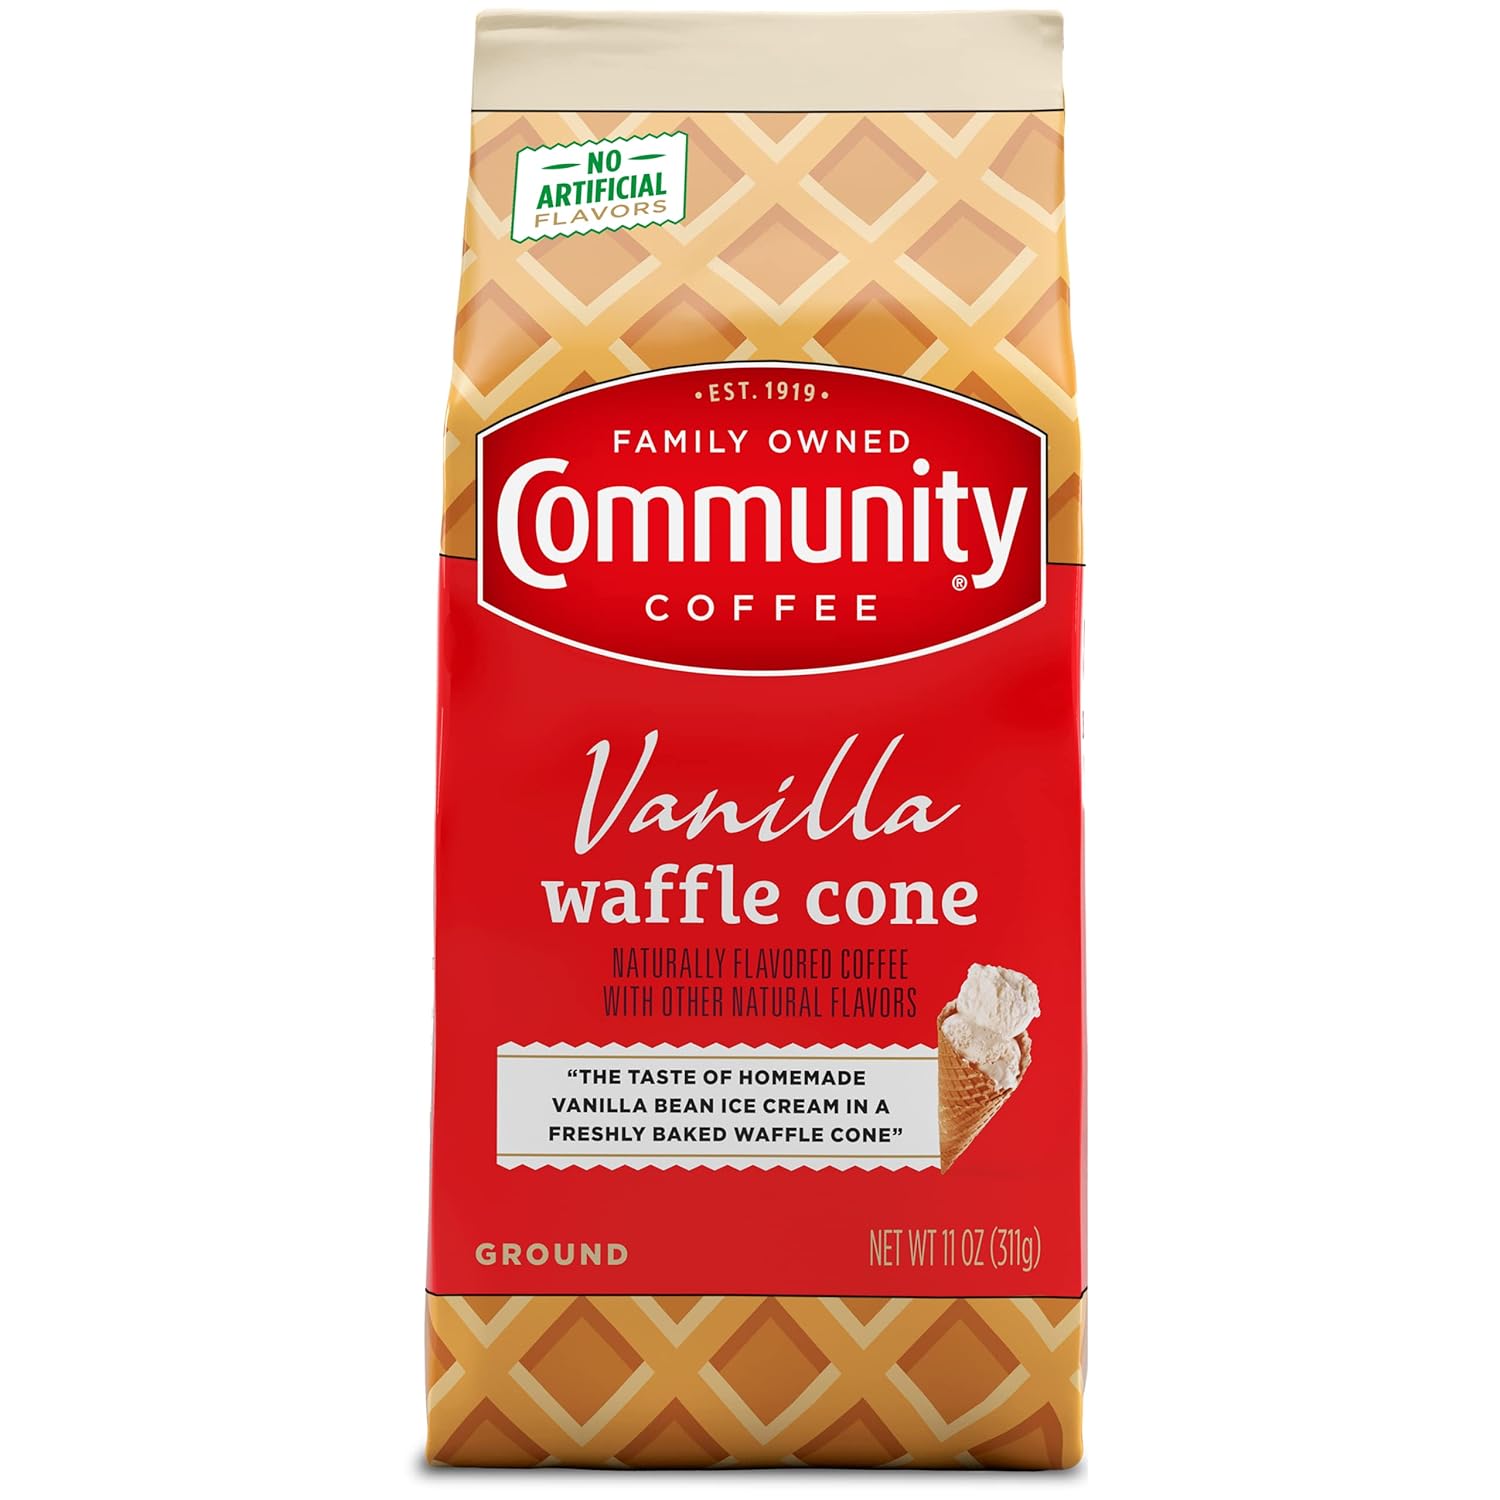 Community Coffee Vanilla Waffle Cone, Ice Cream Flavored Ground Coffee, 11 Ounce Bag (Pack of 1)